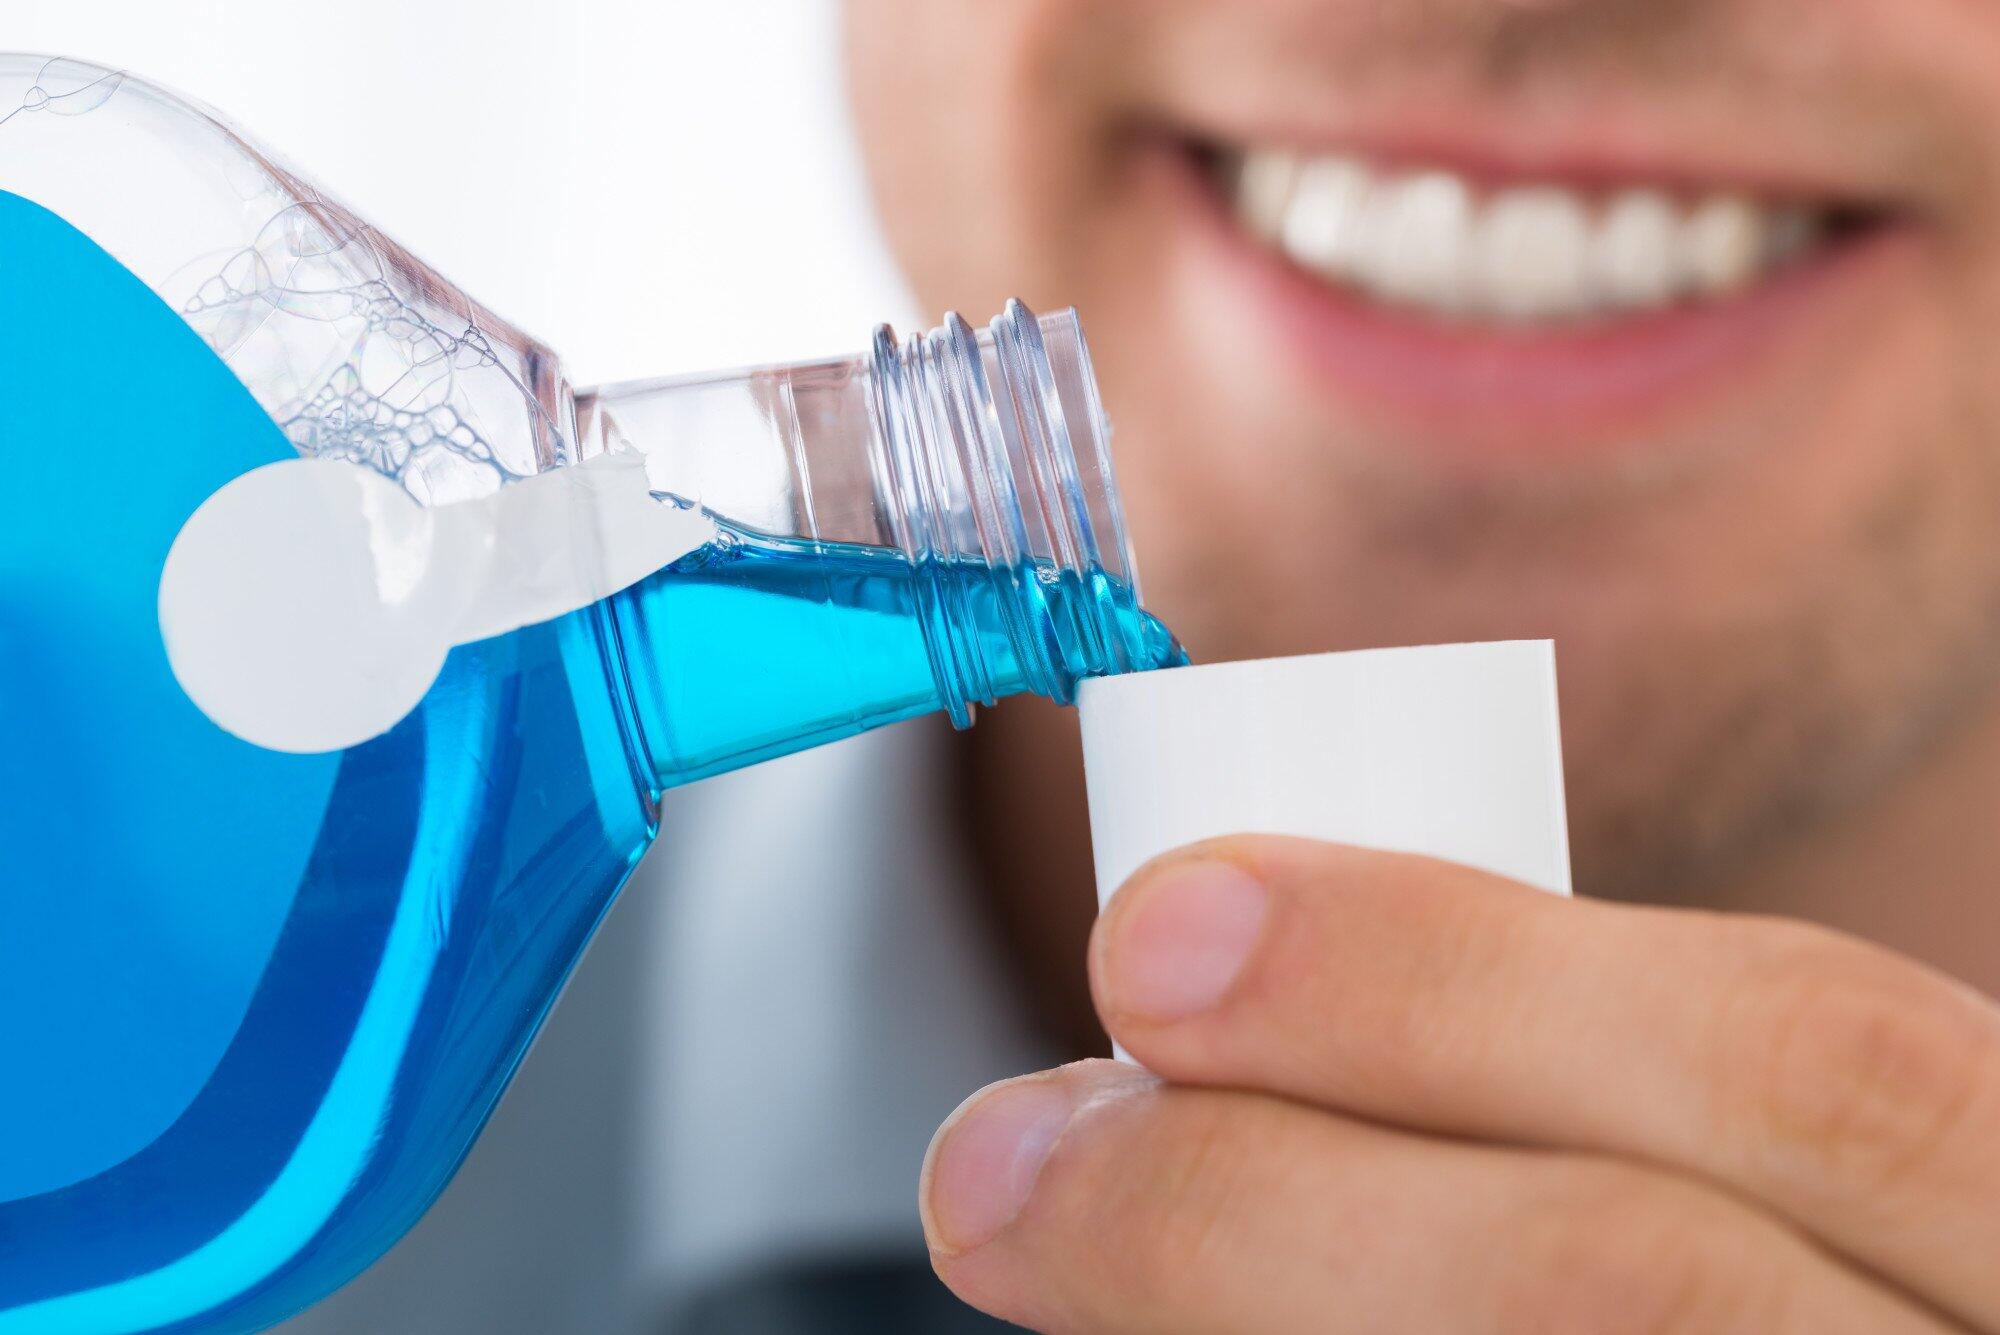 The Top Ingredients to Look for in Organic Mouthwash